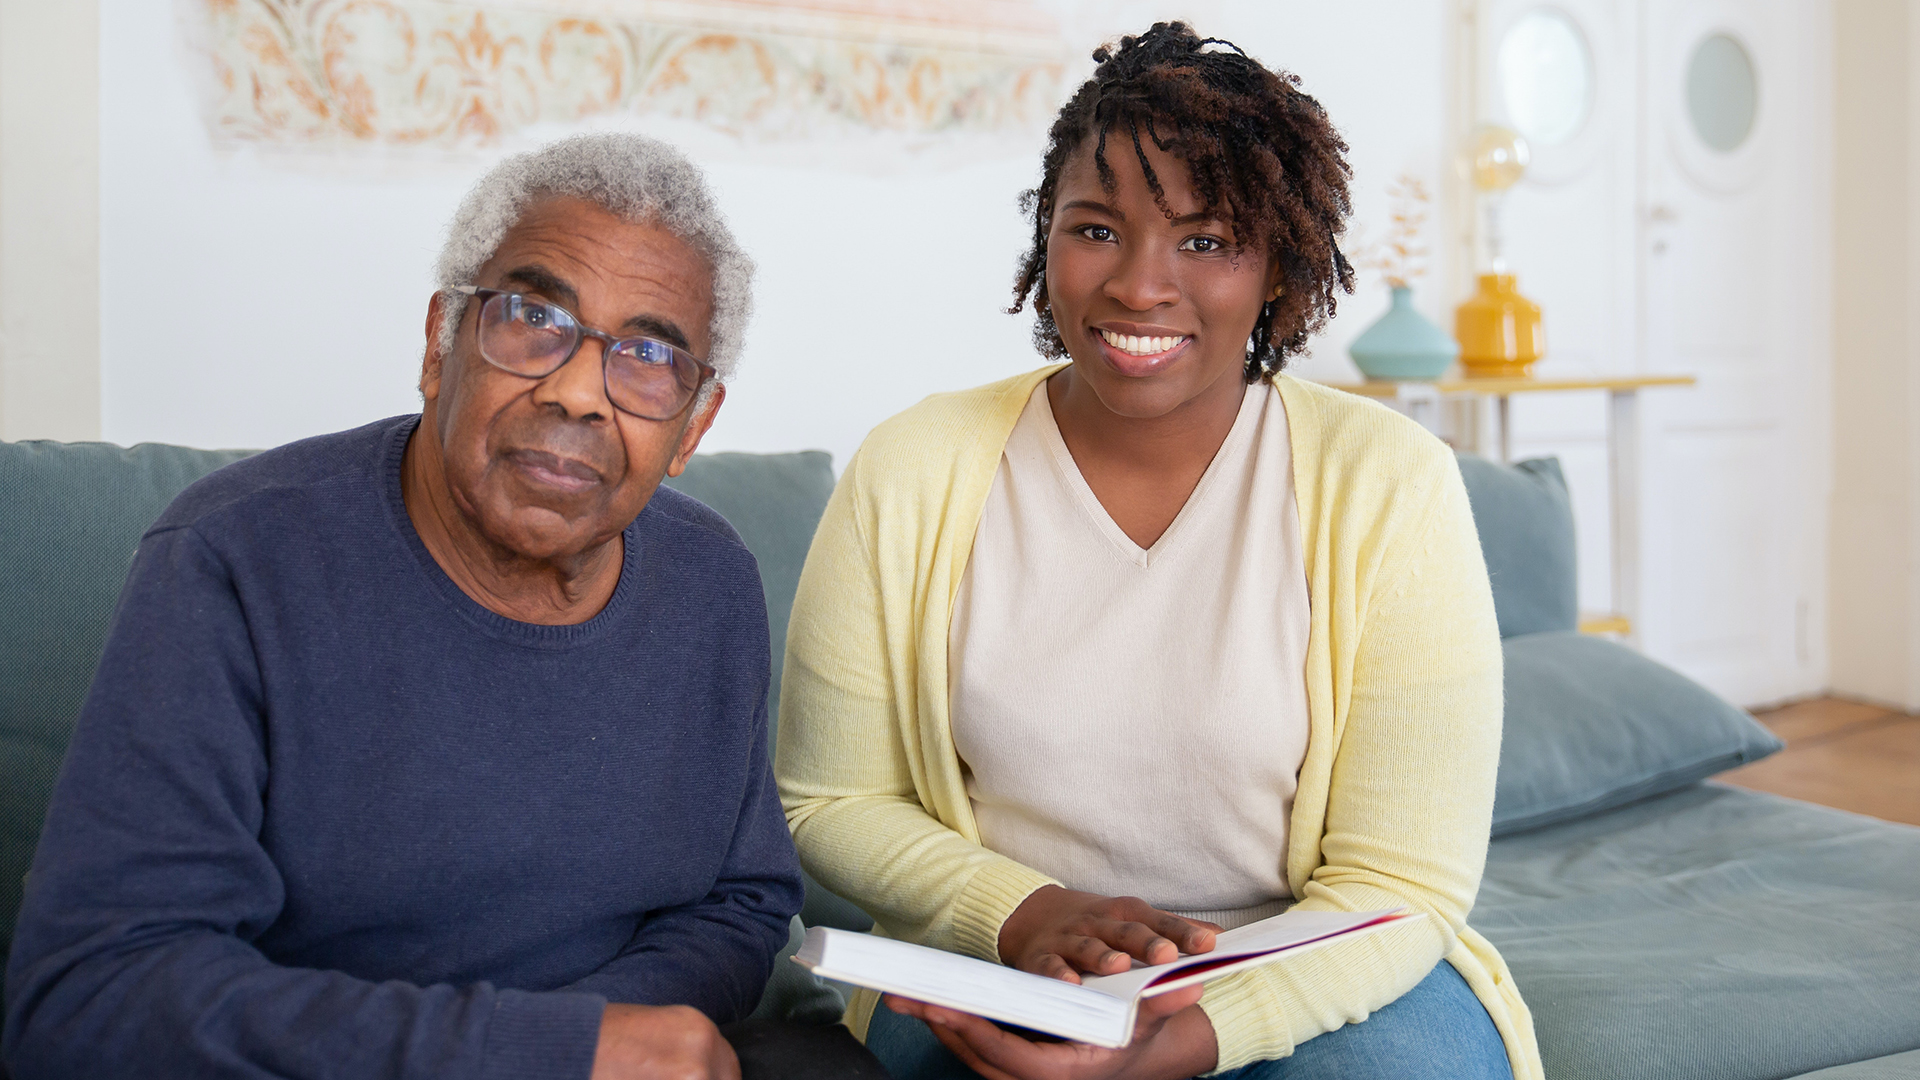 A health care aide reading to an elderly man on a couch in his home